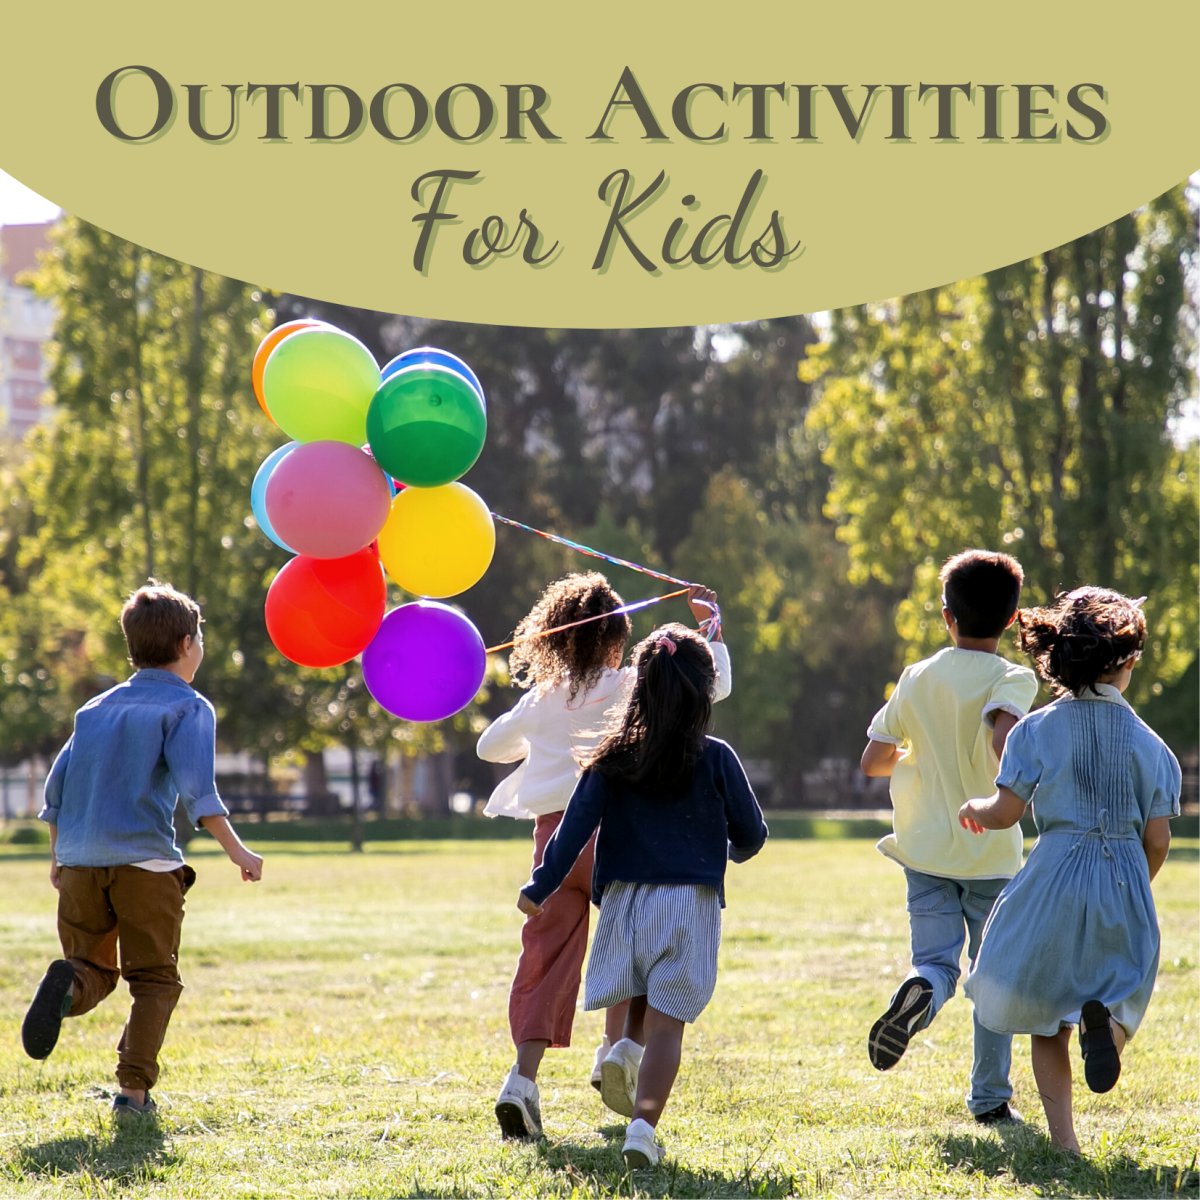 10+ Fun and Engaging Outdoor Activities and Games for Kids